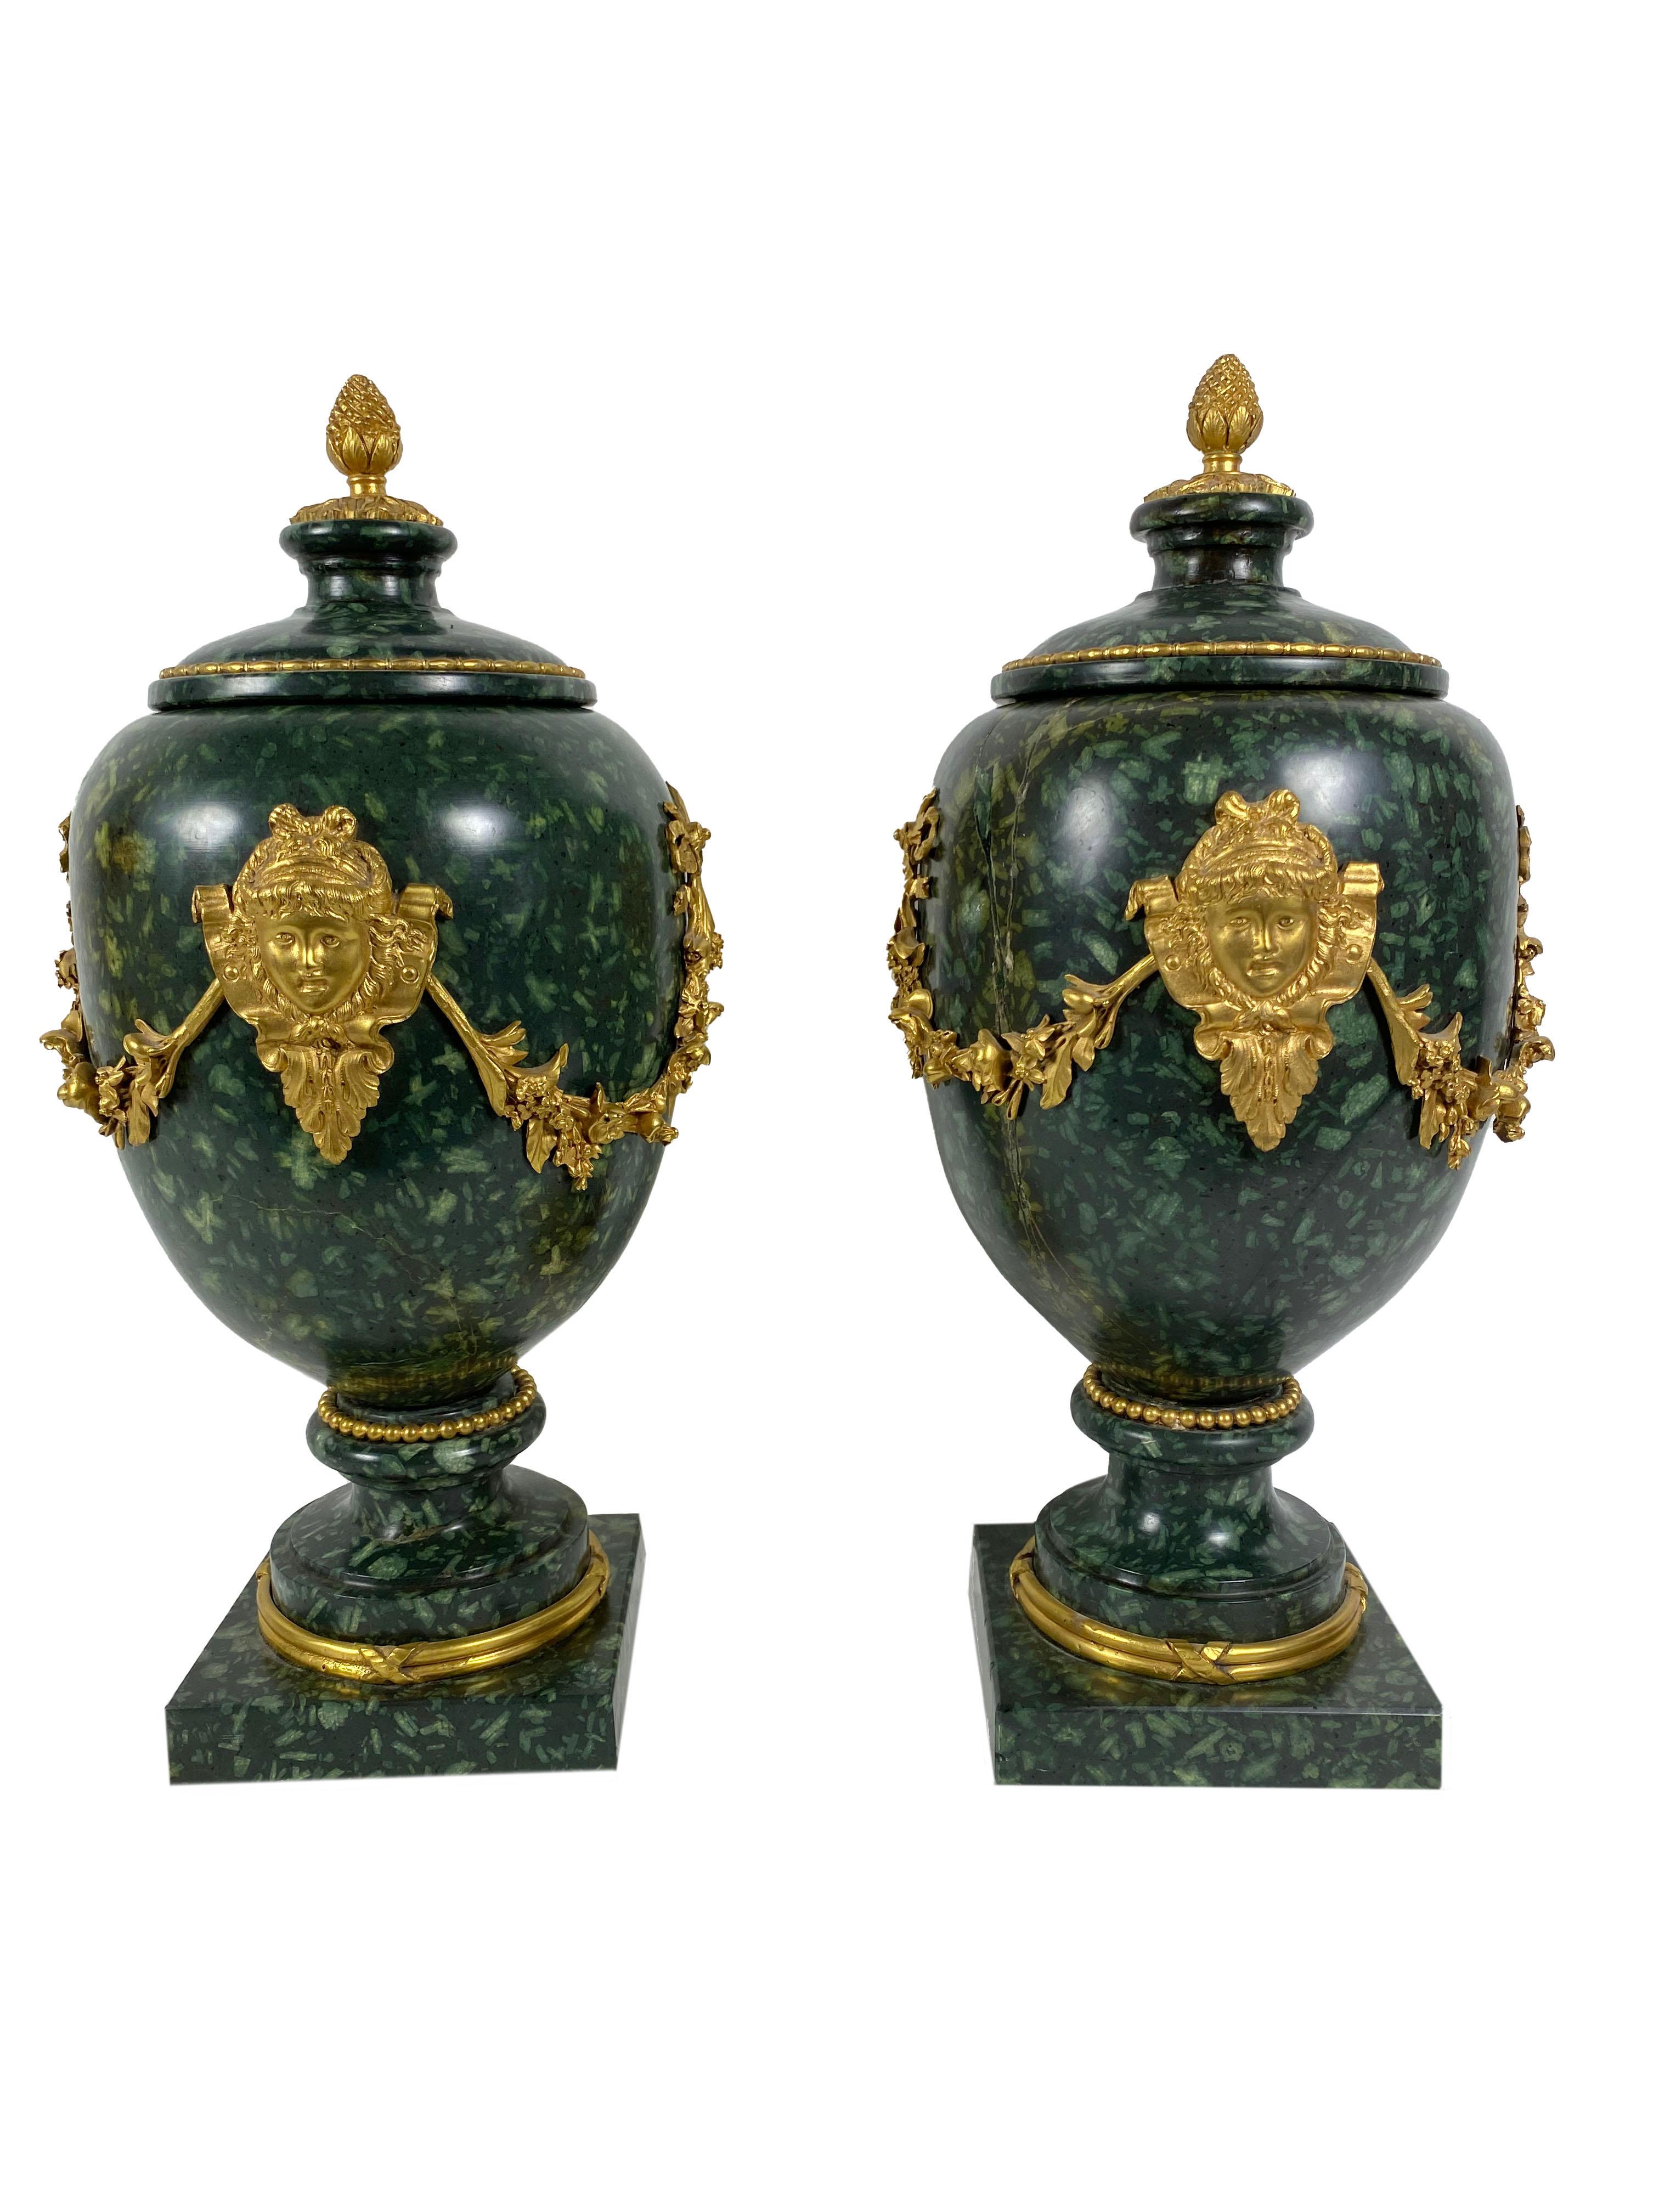 18th century Italian Porphyry stone with 19th century bronze dore mounts with faces and swags that are attached with square screws. French Louis XV style. The vases are with lids, four pieces total.